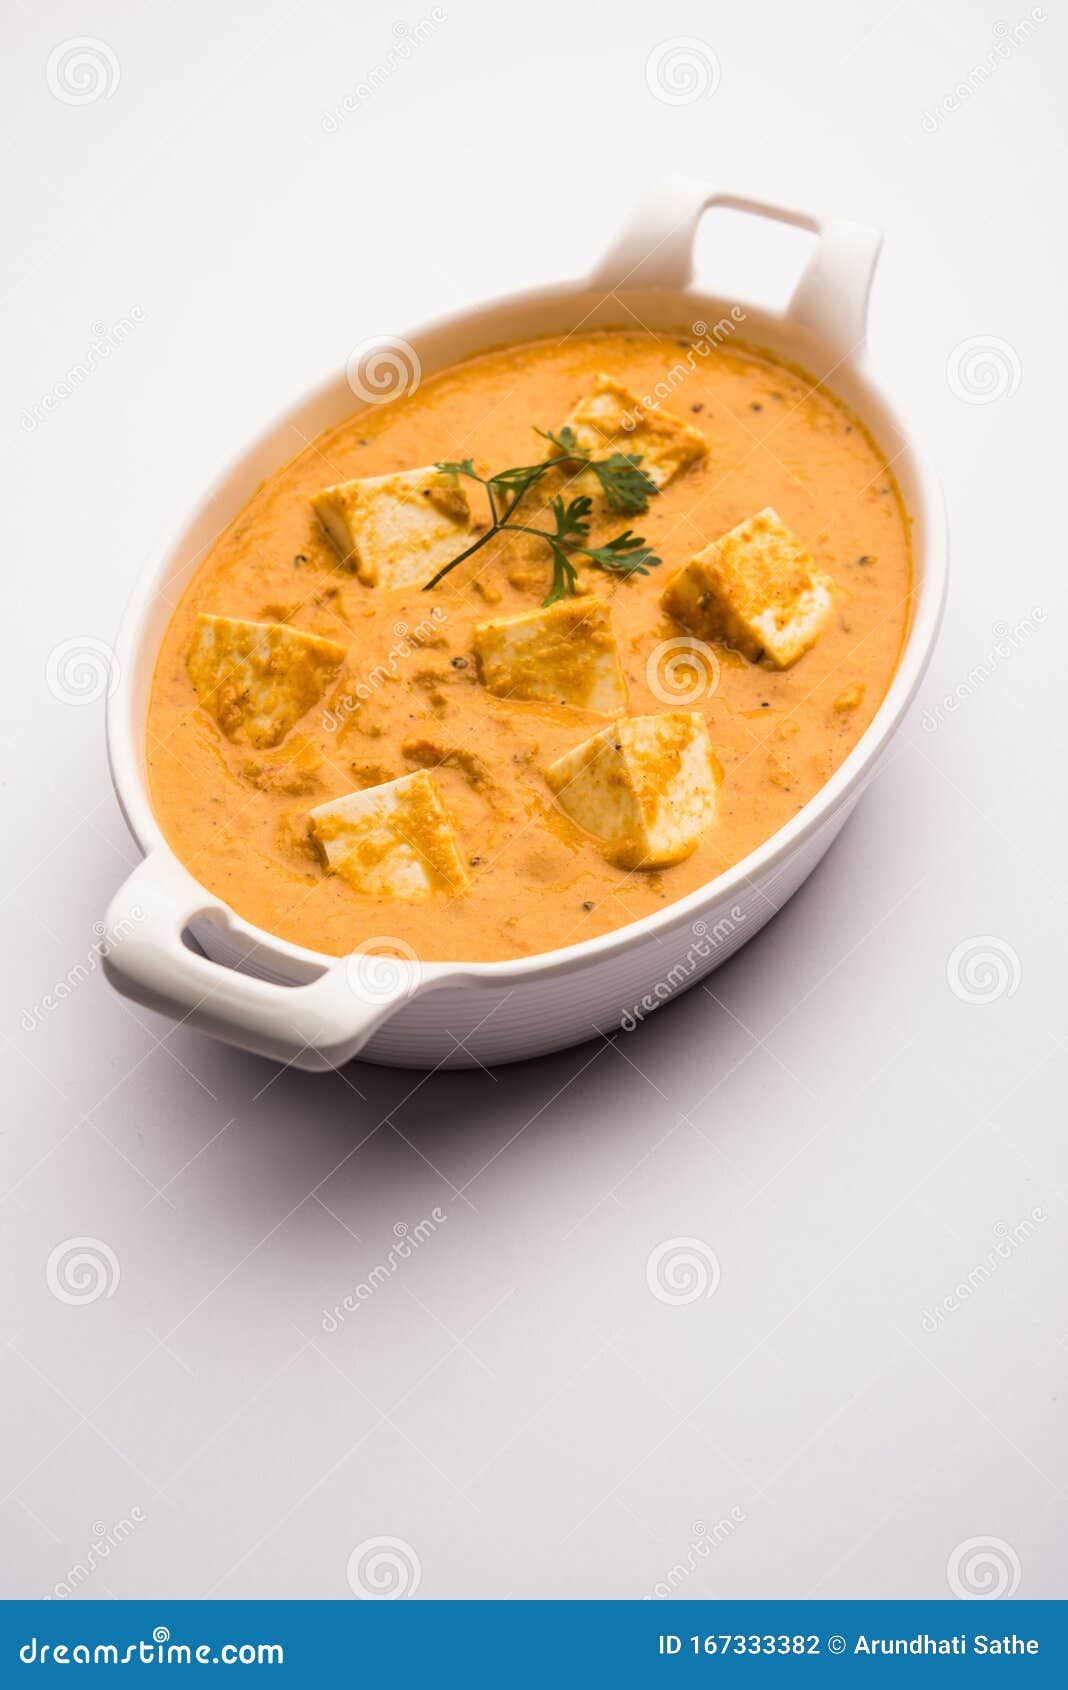 Vegetarian Paneer Korma Recipe; an Easy and Quick Indian Cottage Cheese ...